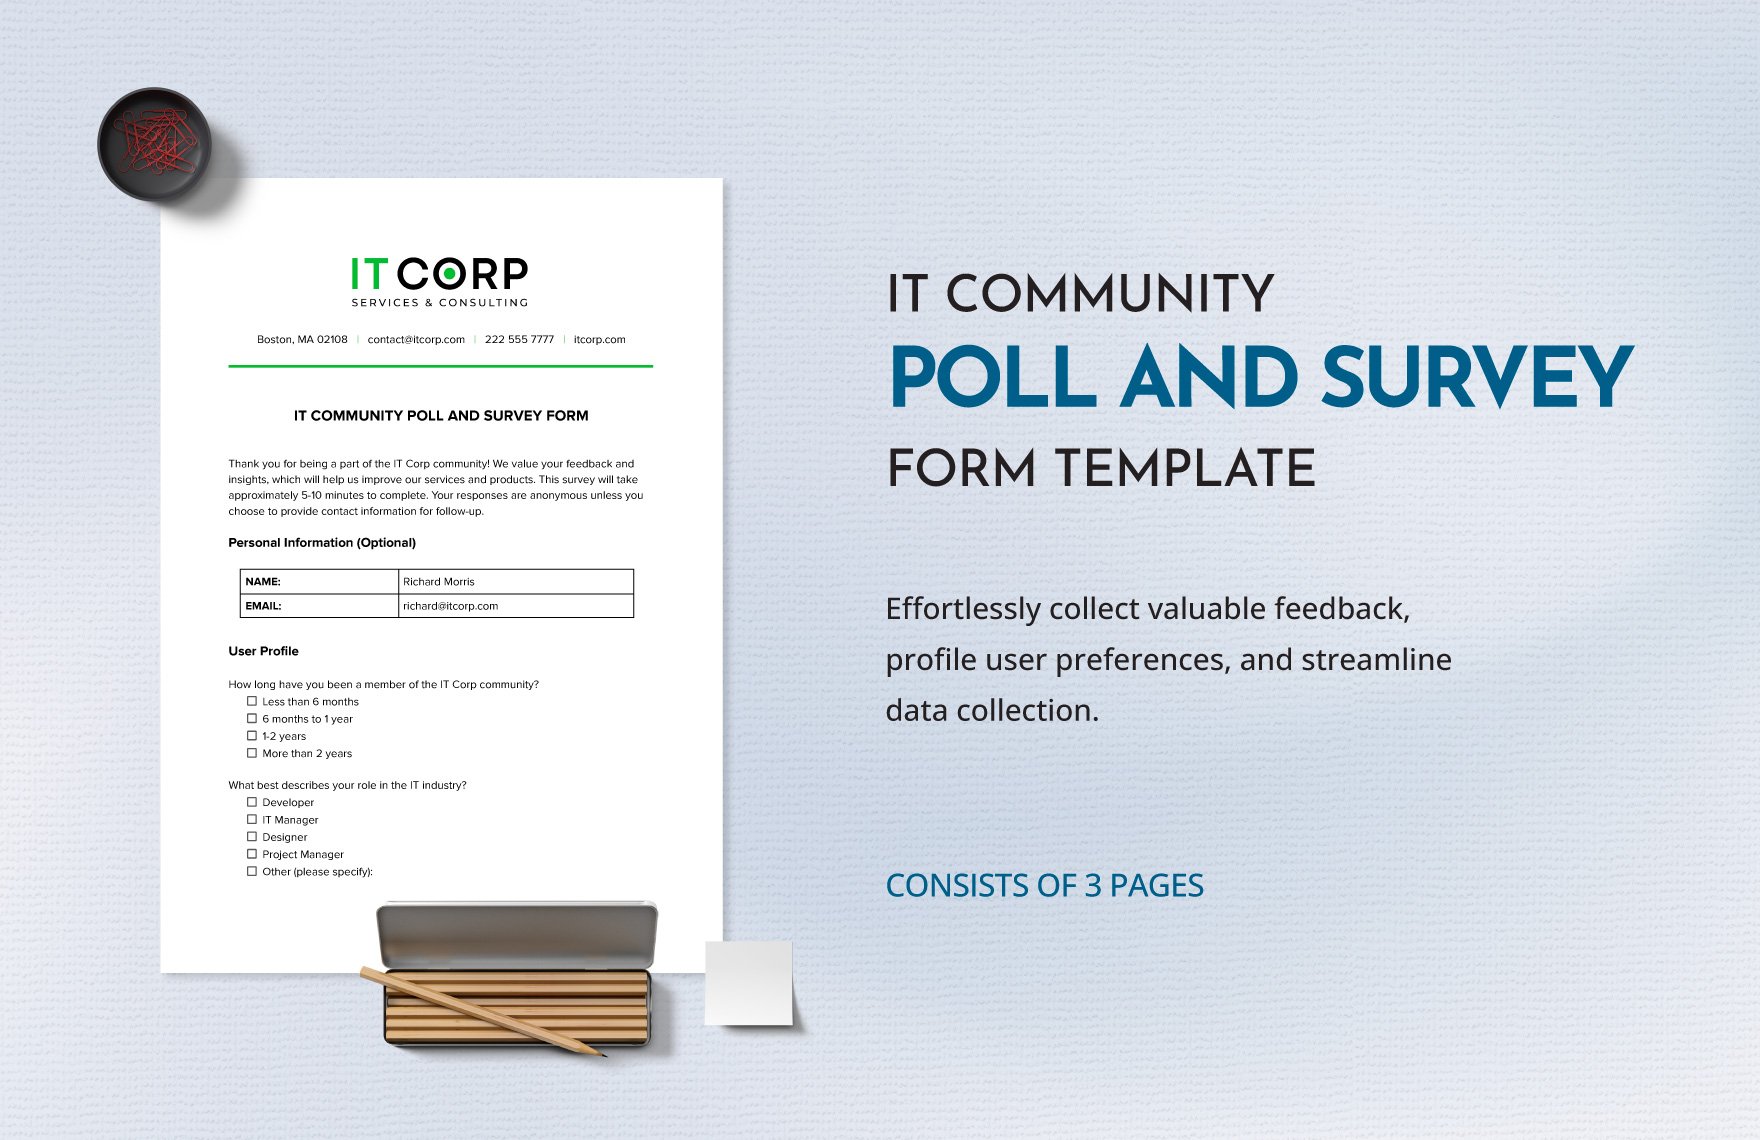 IT Community Poll and Survey Form Template